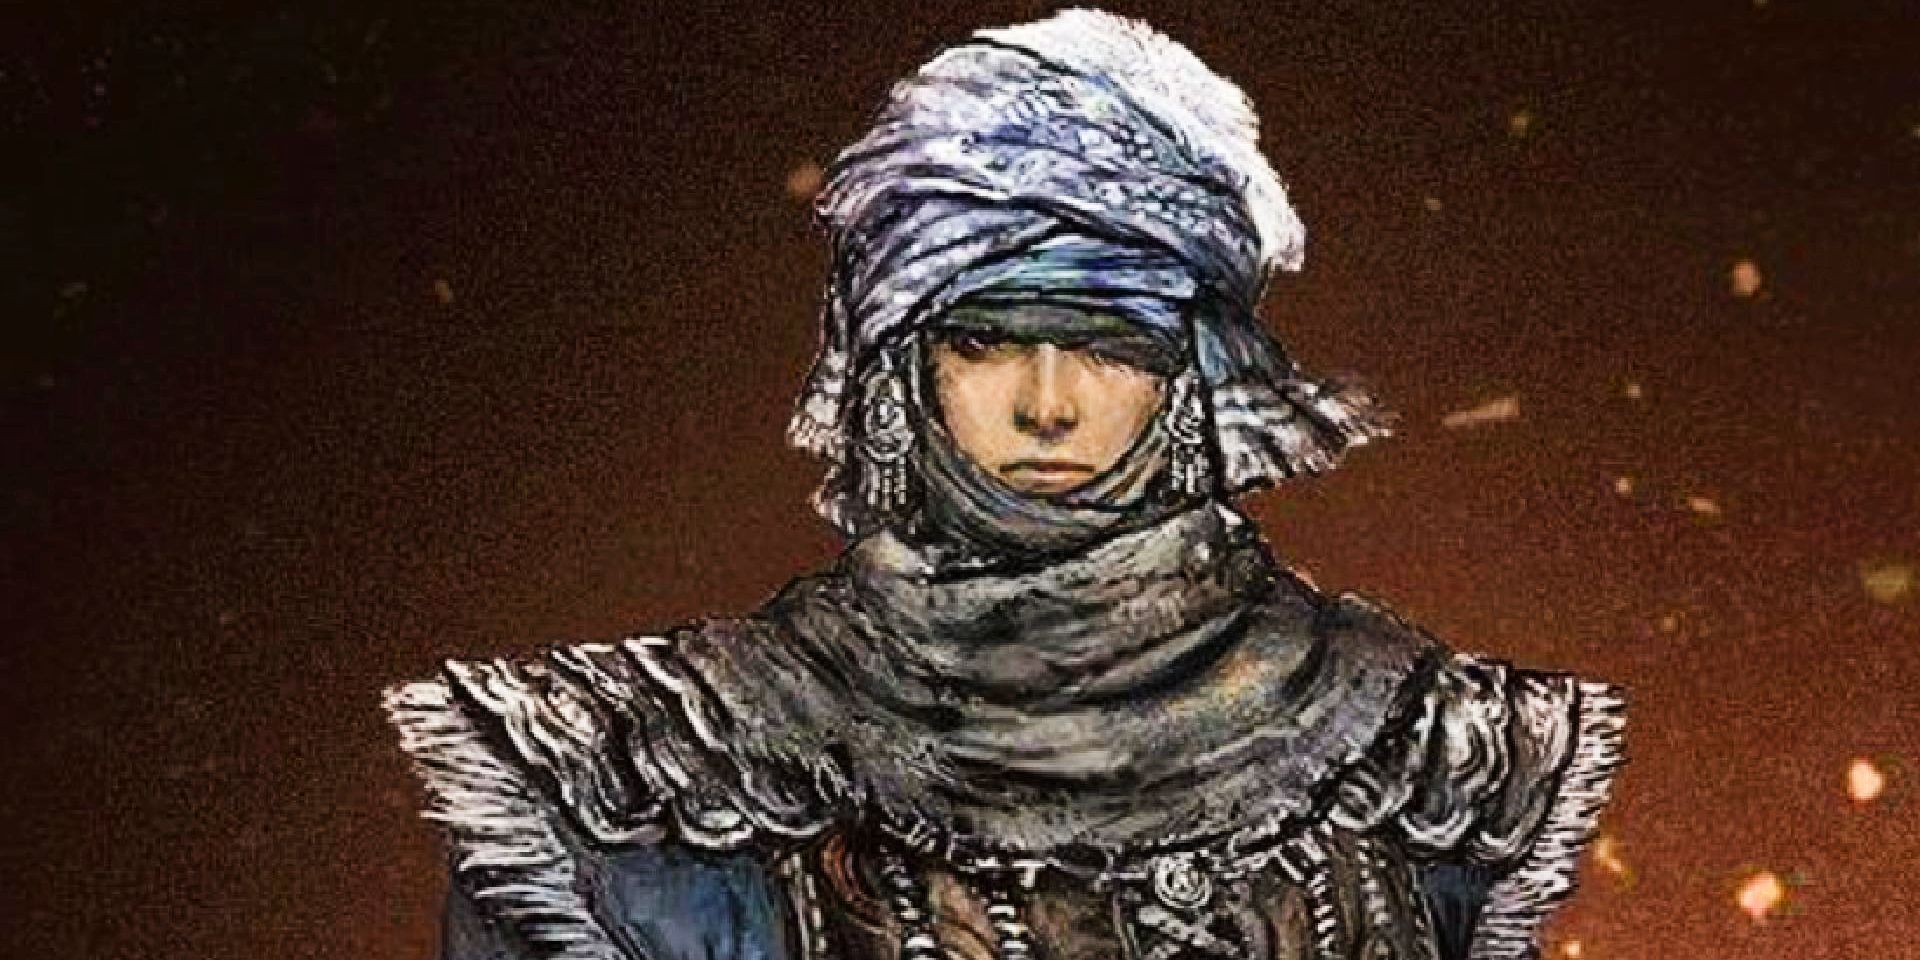 Cropped image of the official artwork for the Warrior class in Elden Ring.